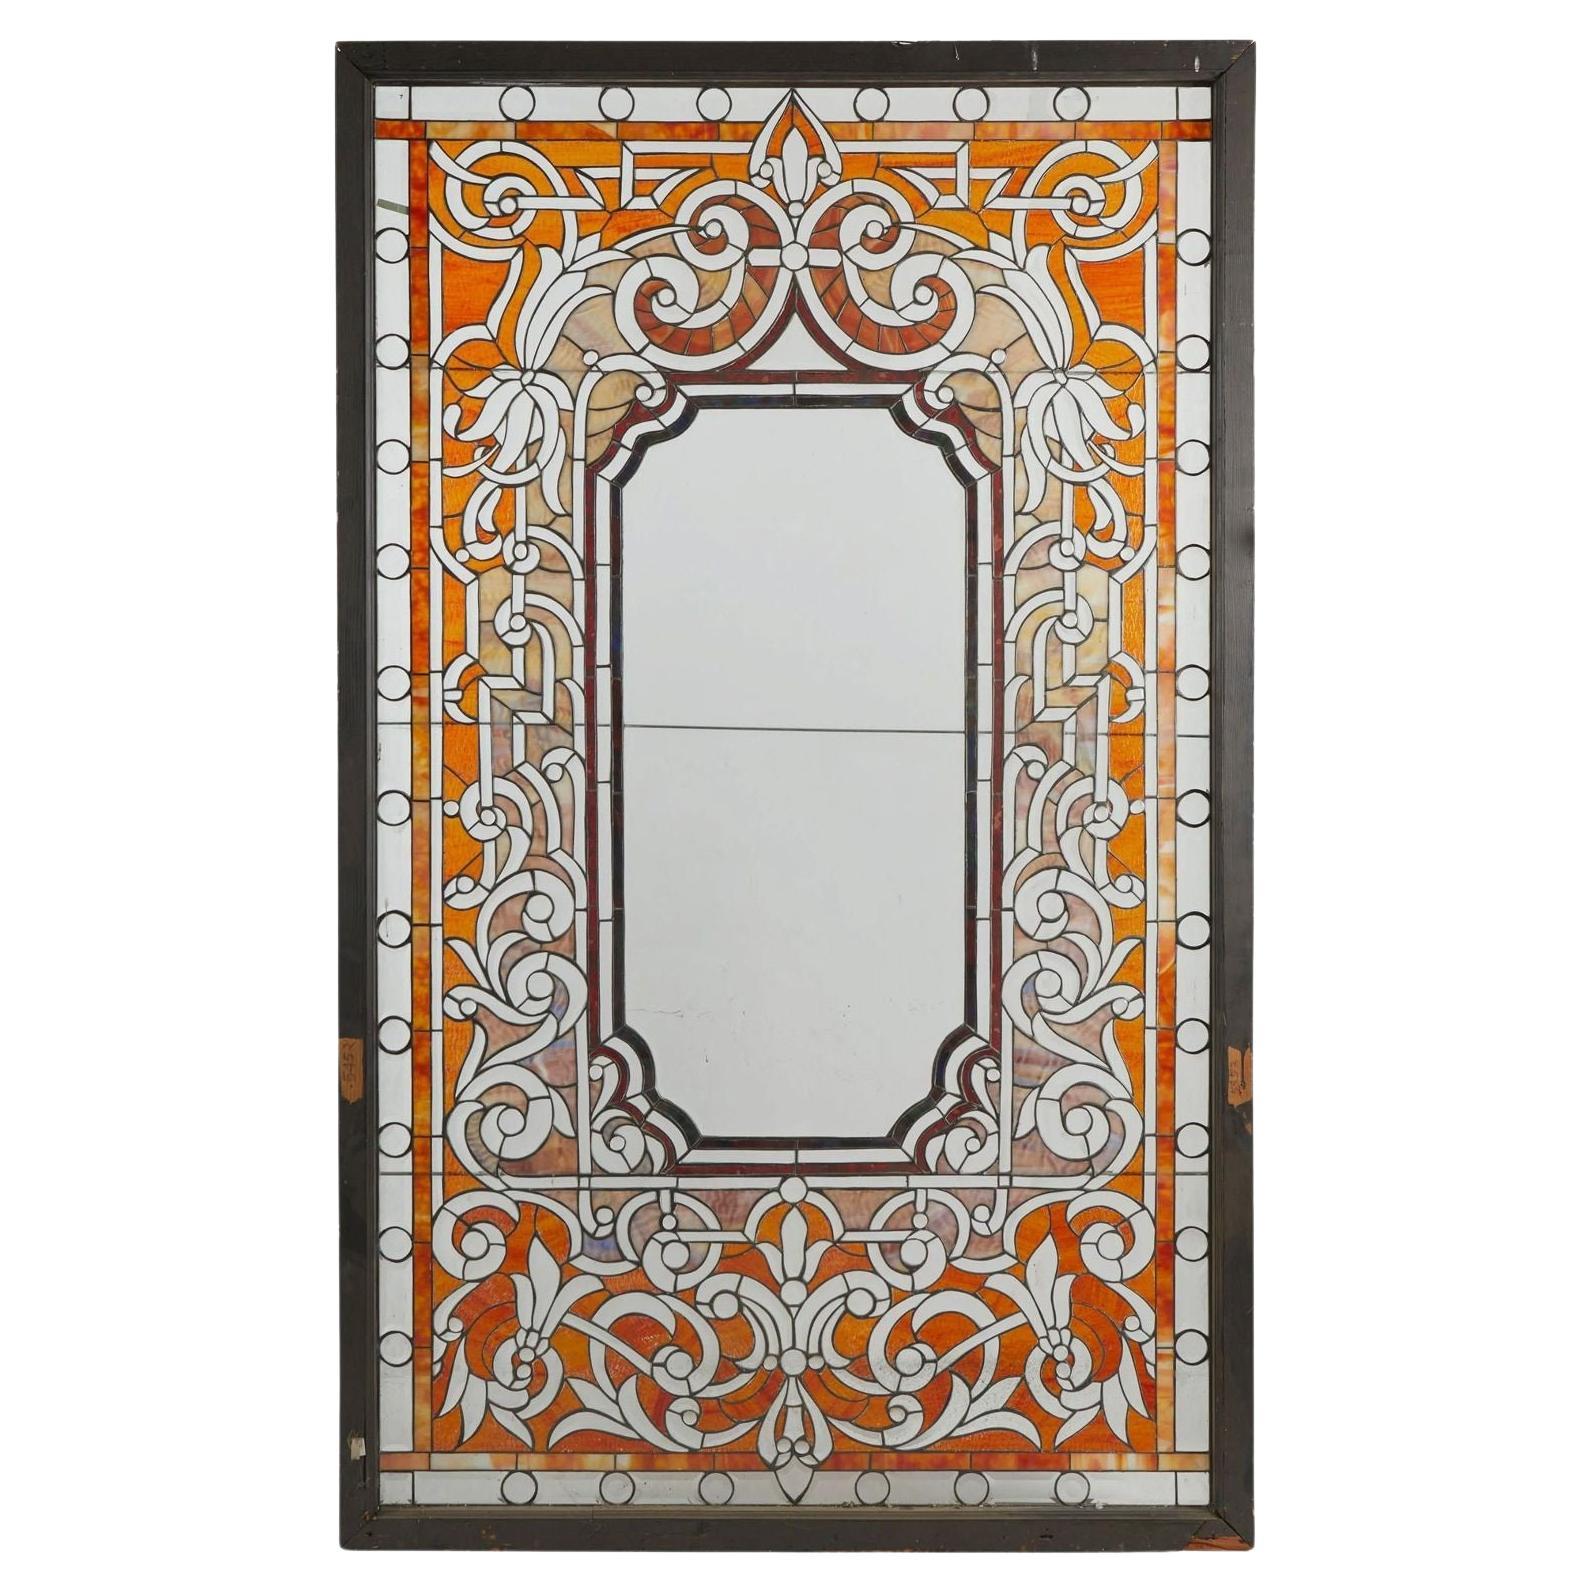 19th Century, Colorful Leaded Glass Window For Sale